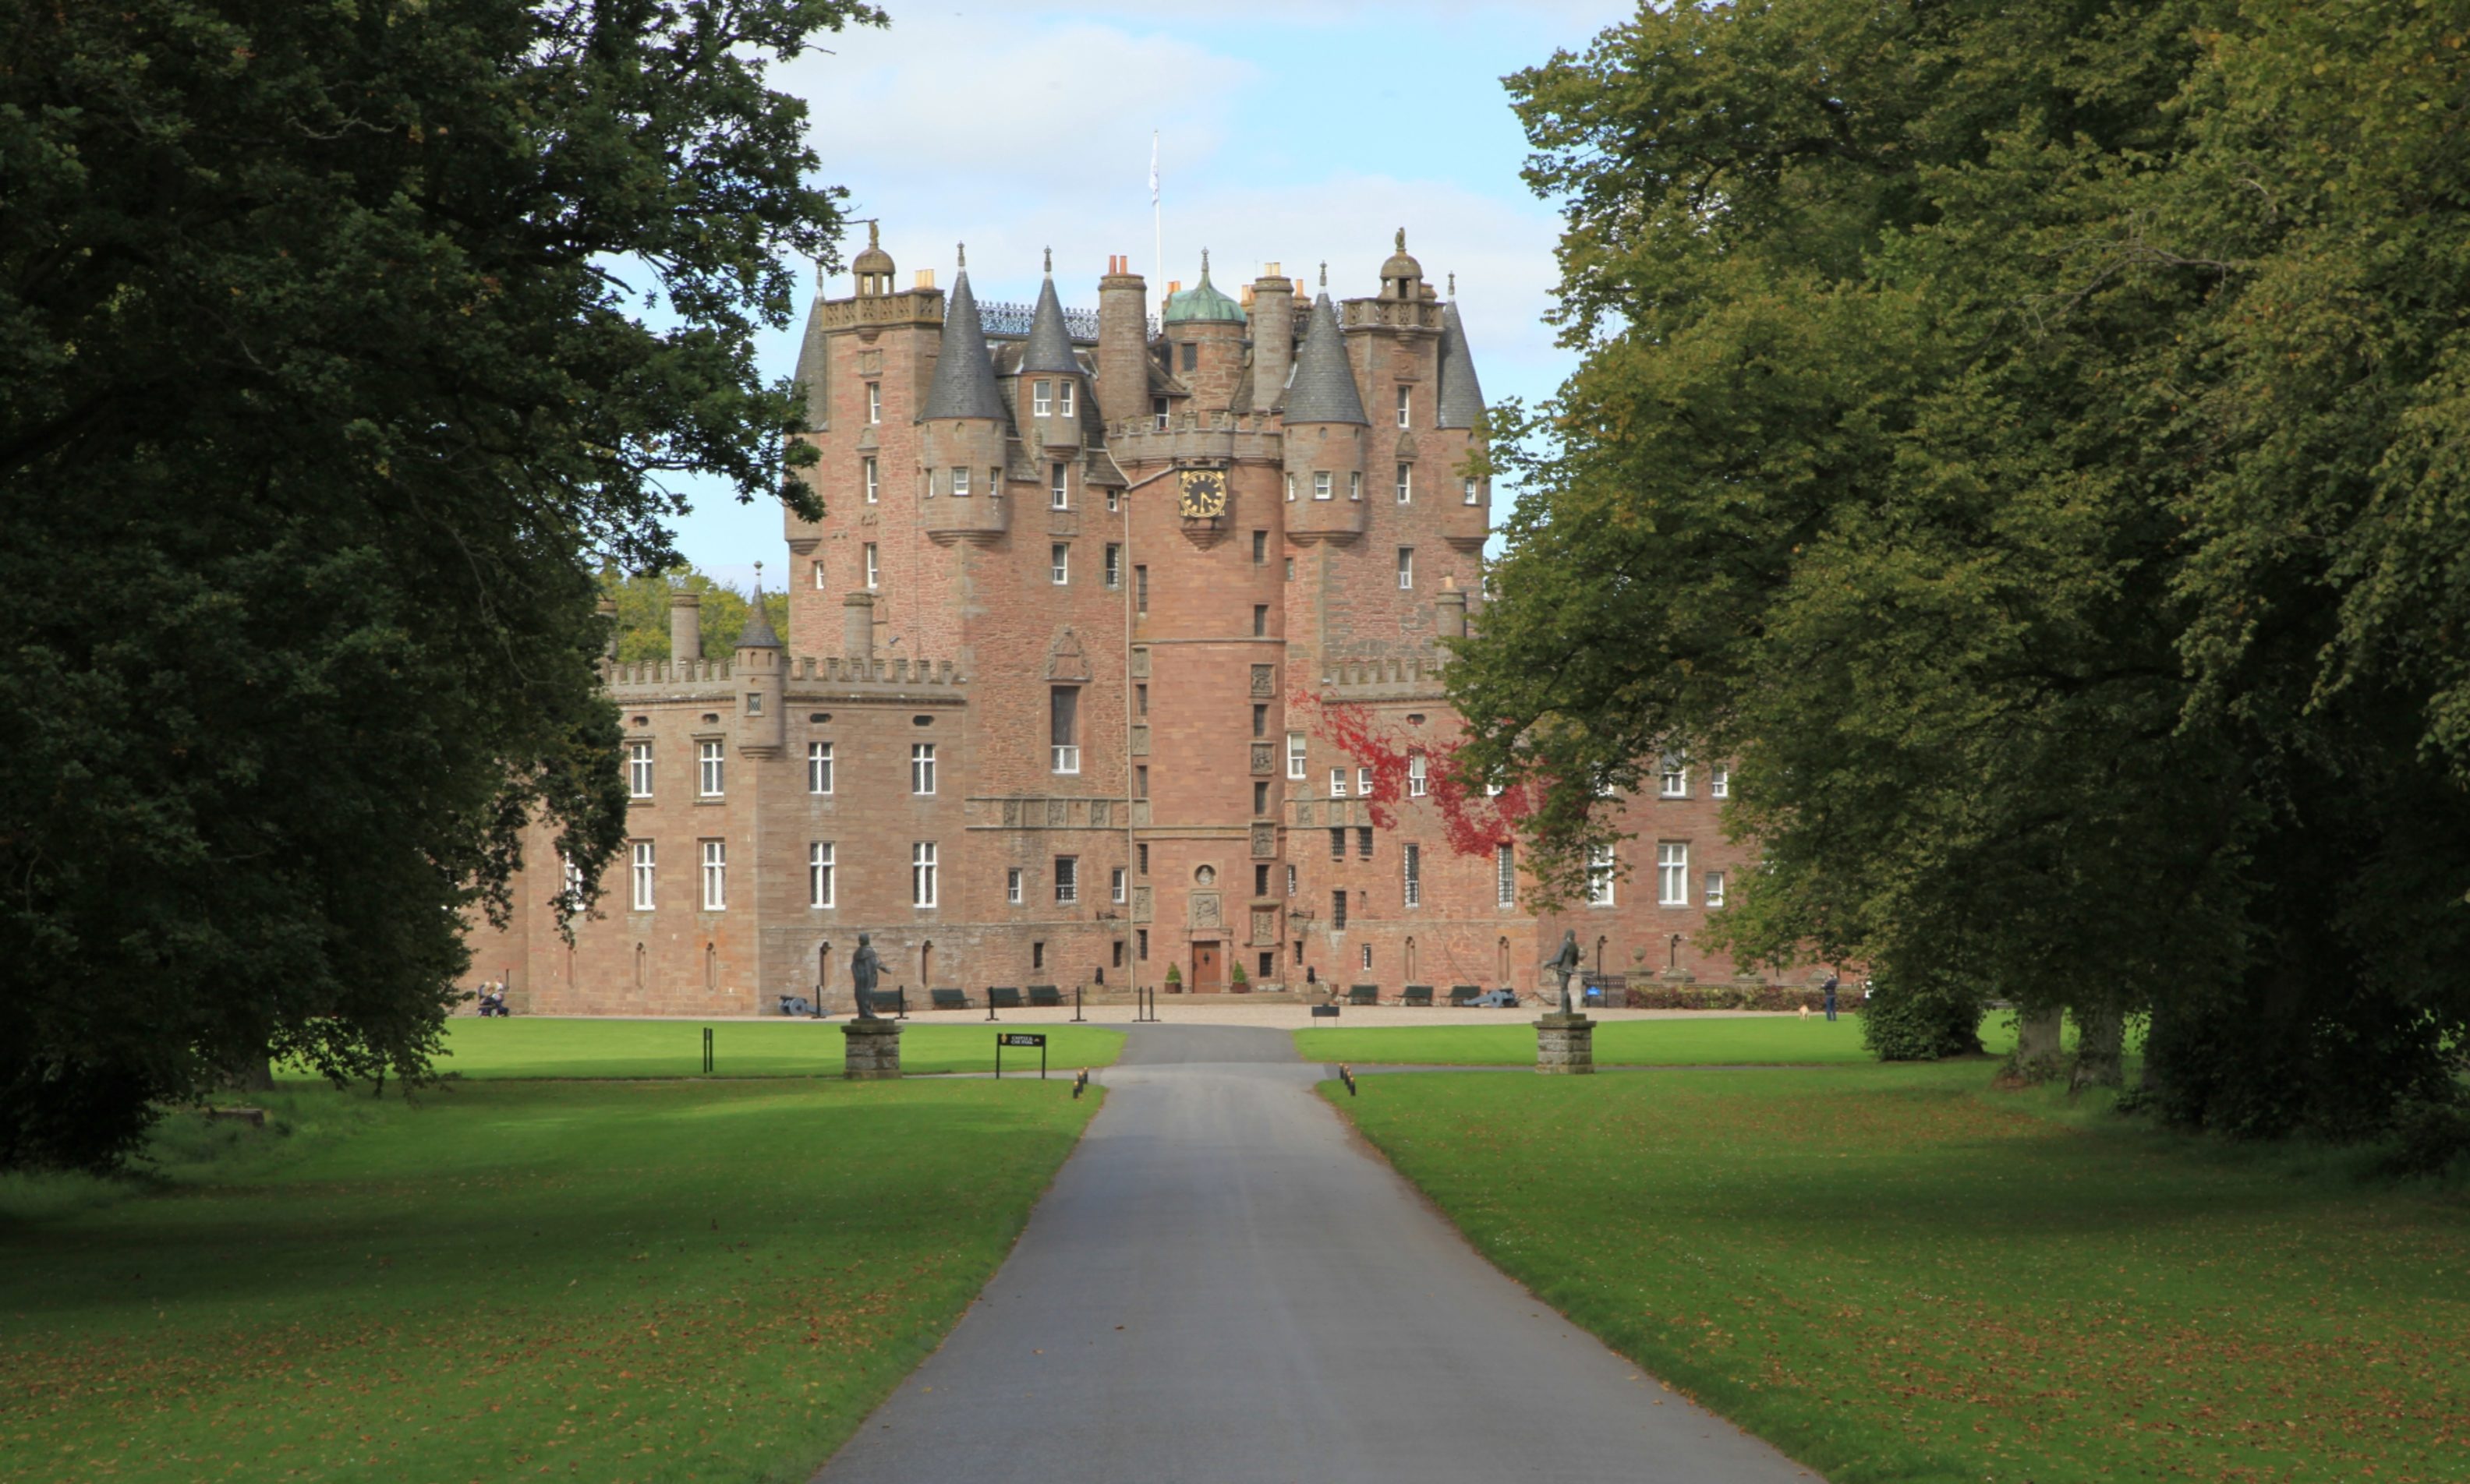 Glamis House is located within the Glamis Castle estate,.